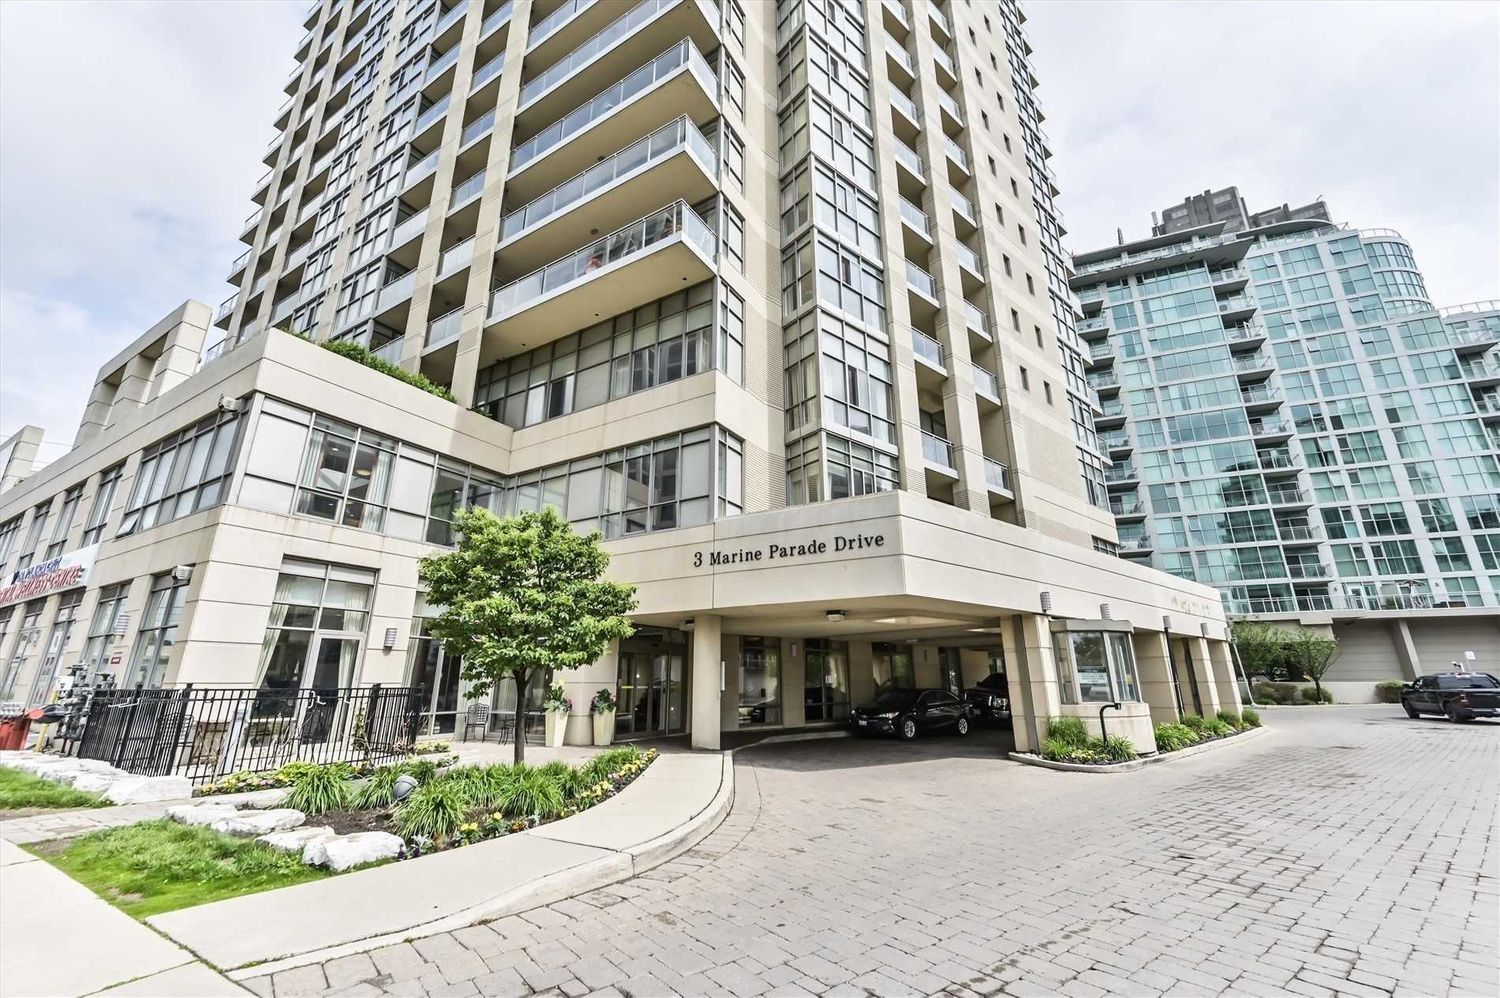 3 Marine Parade Drive. Hearthstone by the Bay Condos is located in  Etobicoke, Toronto - image #2 of 2